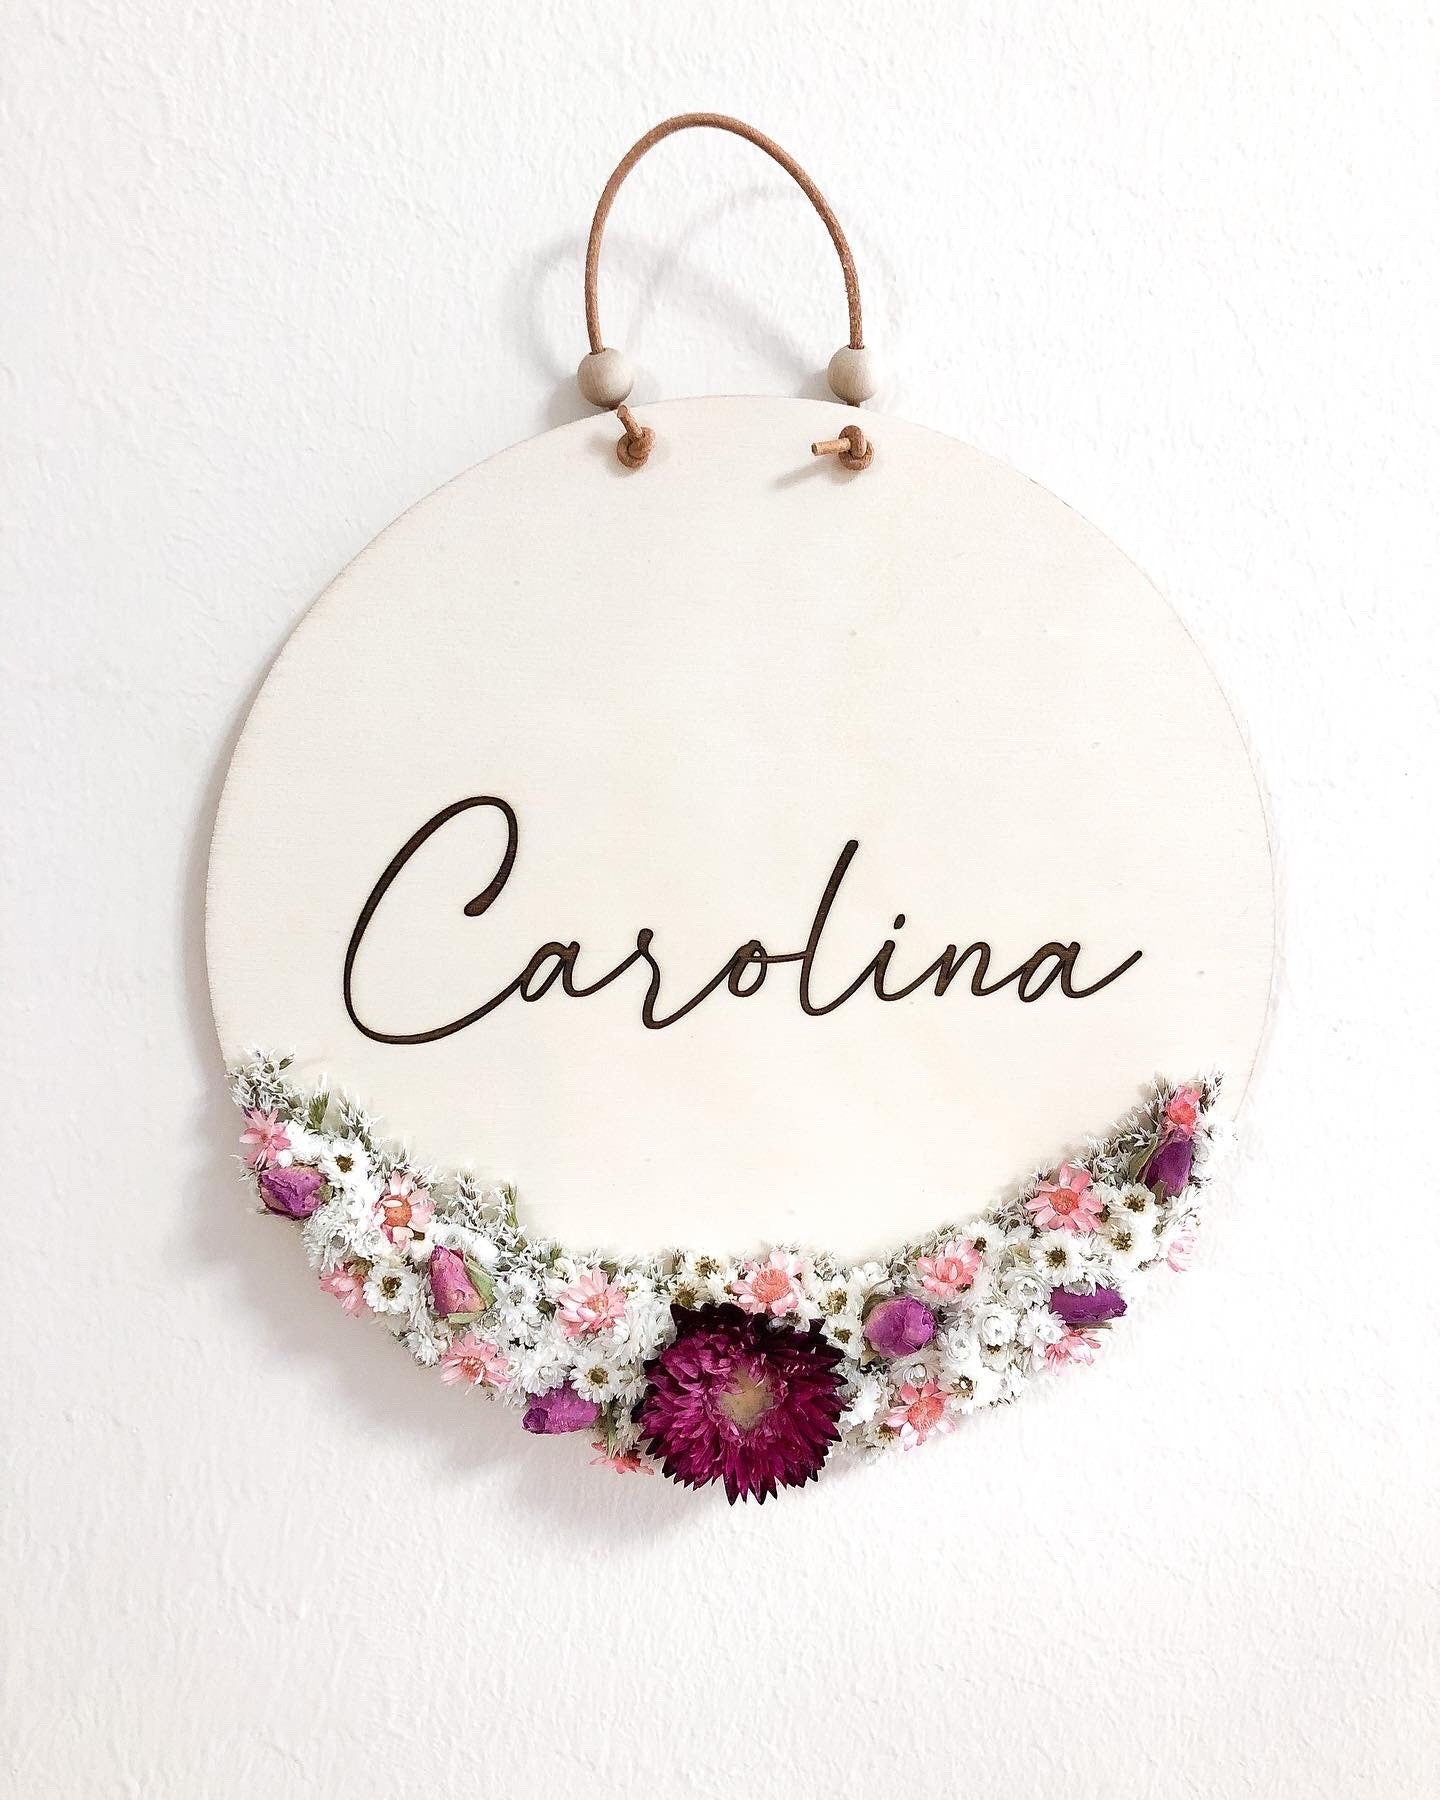 Name tag personalized with dried flowers